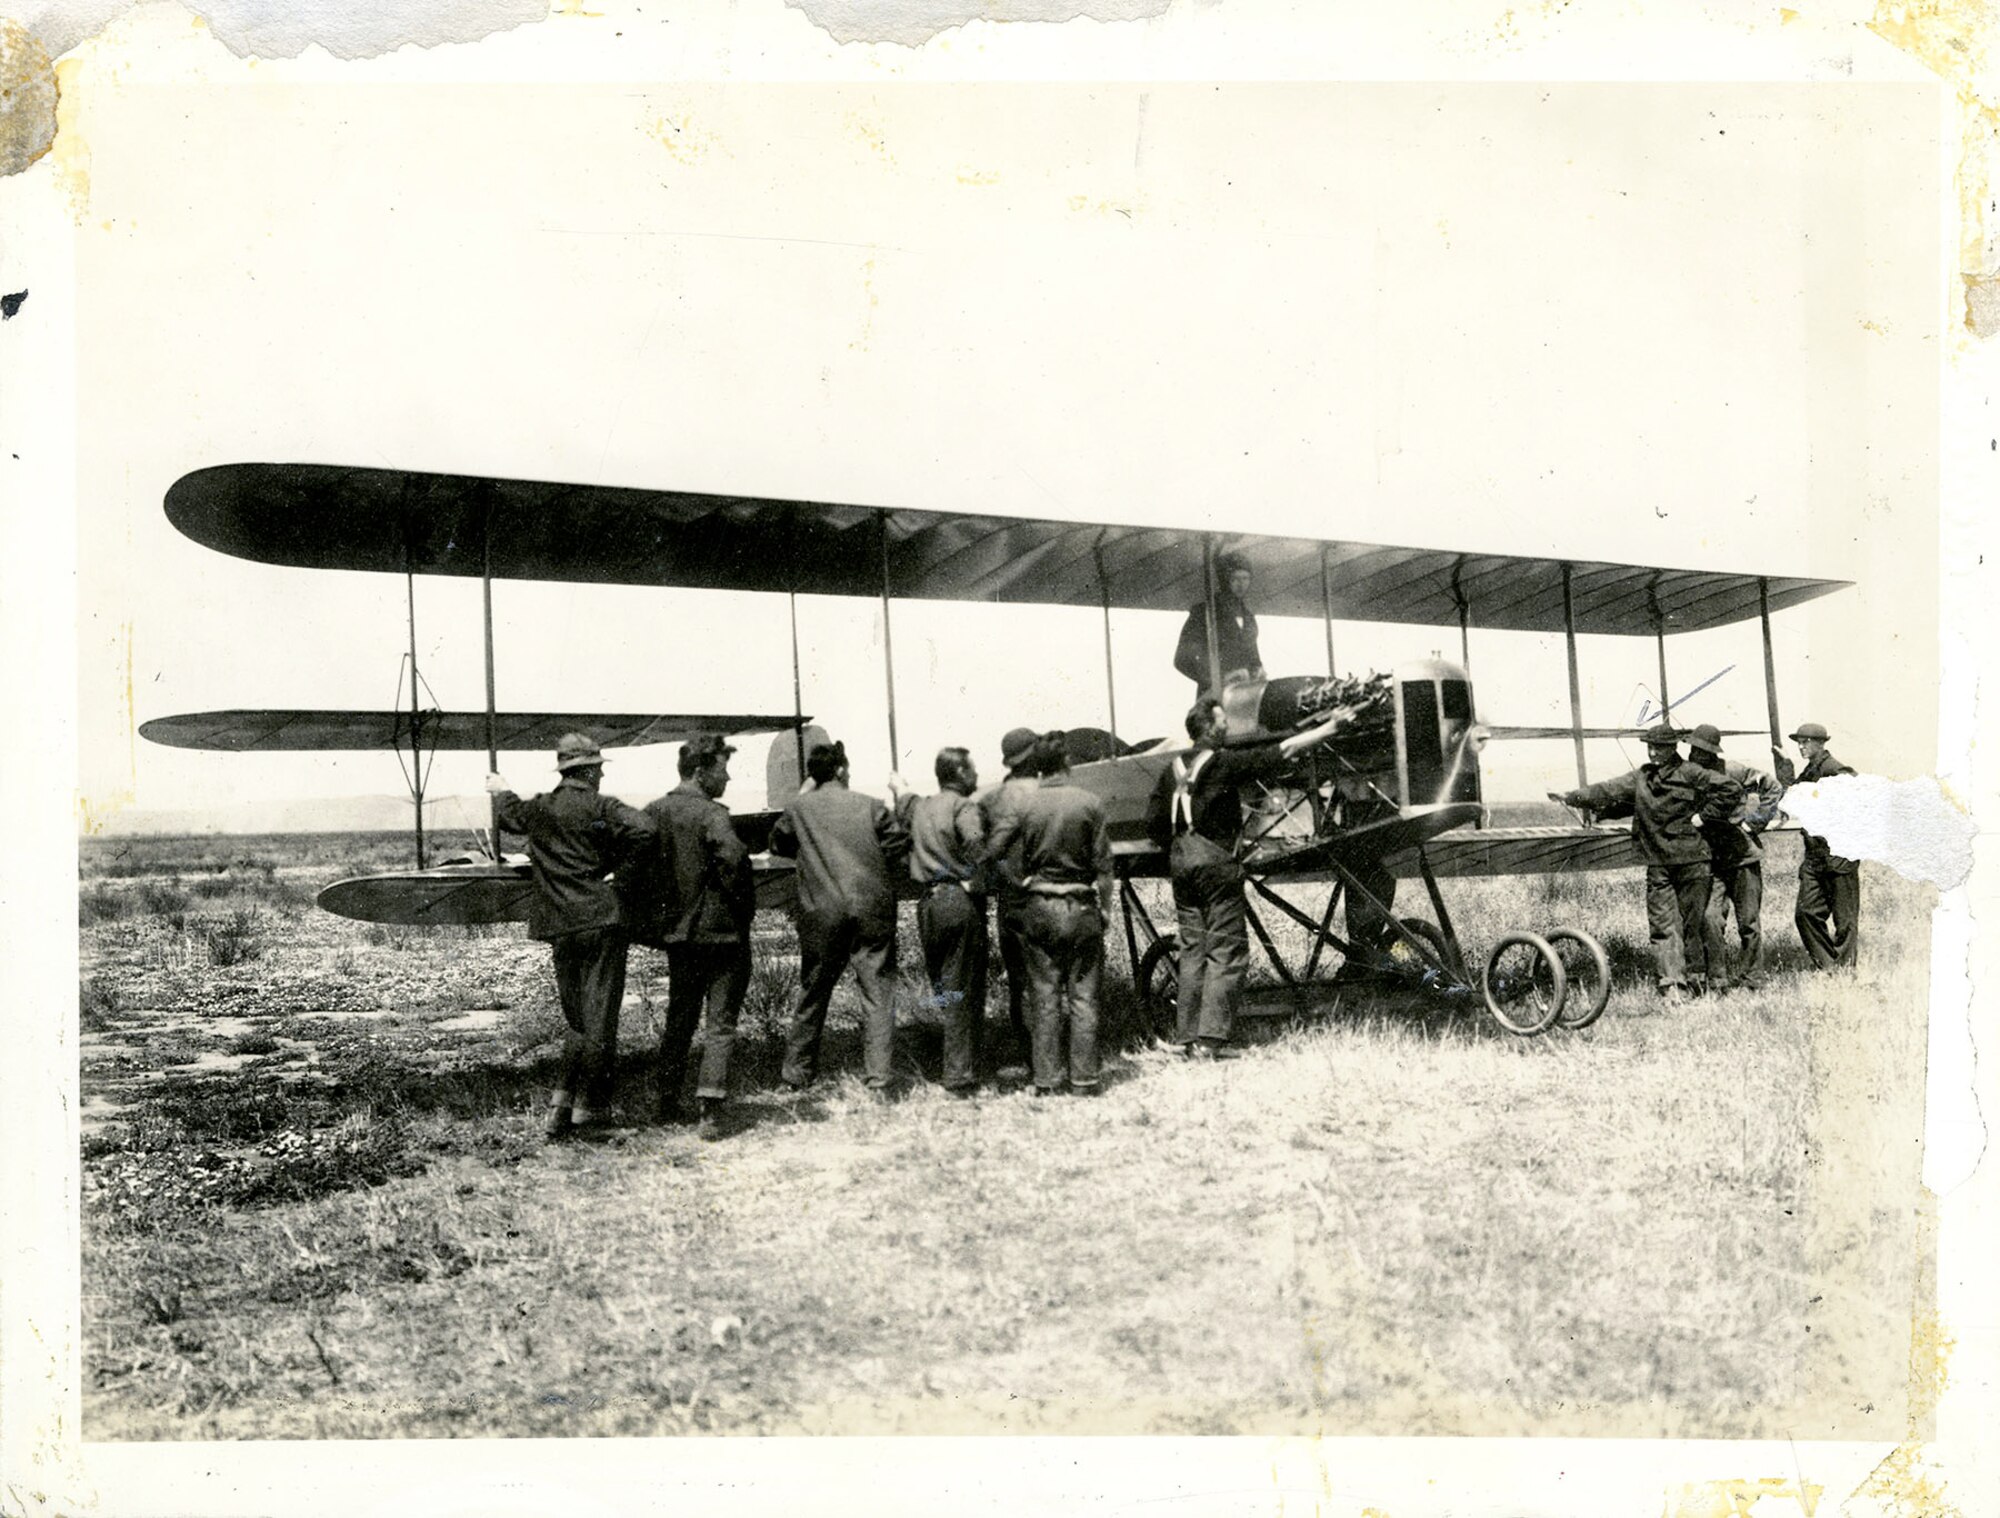 Master Sgt. Carl T. Hale, one of the first enlisted men assigned to the Aviation Section of the Army Signal Corps, was assigned to the Wright section first at College Park, Md., and later at Texas City, Texas. This series of photos depicts early flying activities at Texas City. Hale retired in 1938 after more than 30 years of service in Army aviation. (U.S. Air Force photo)